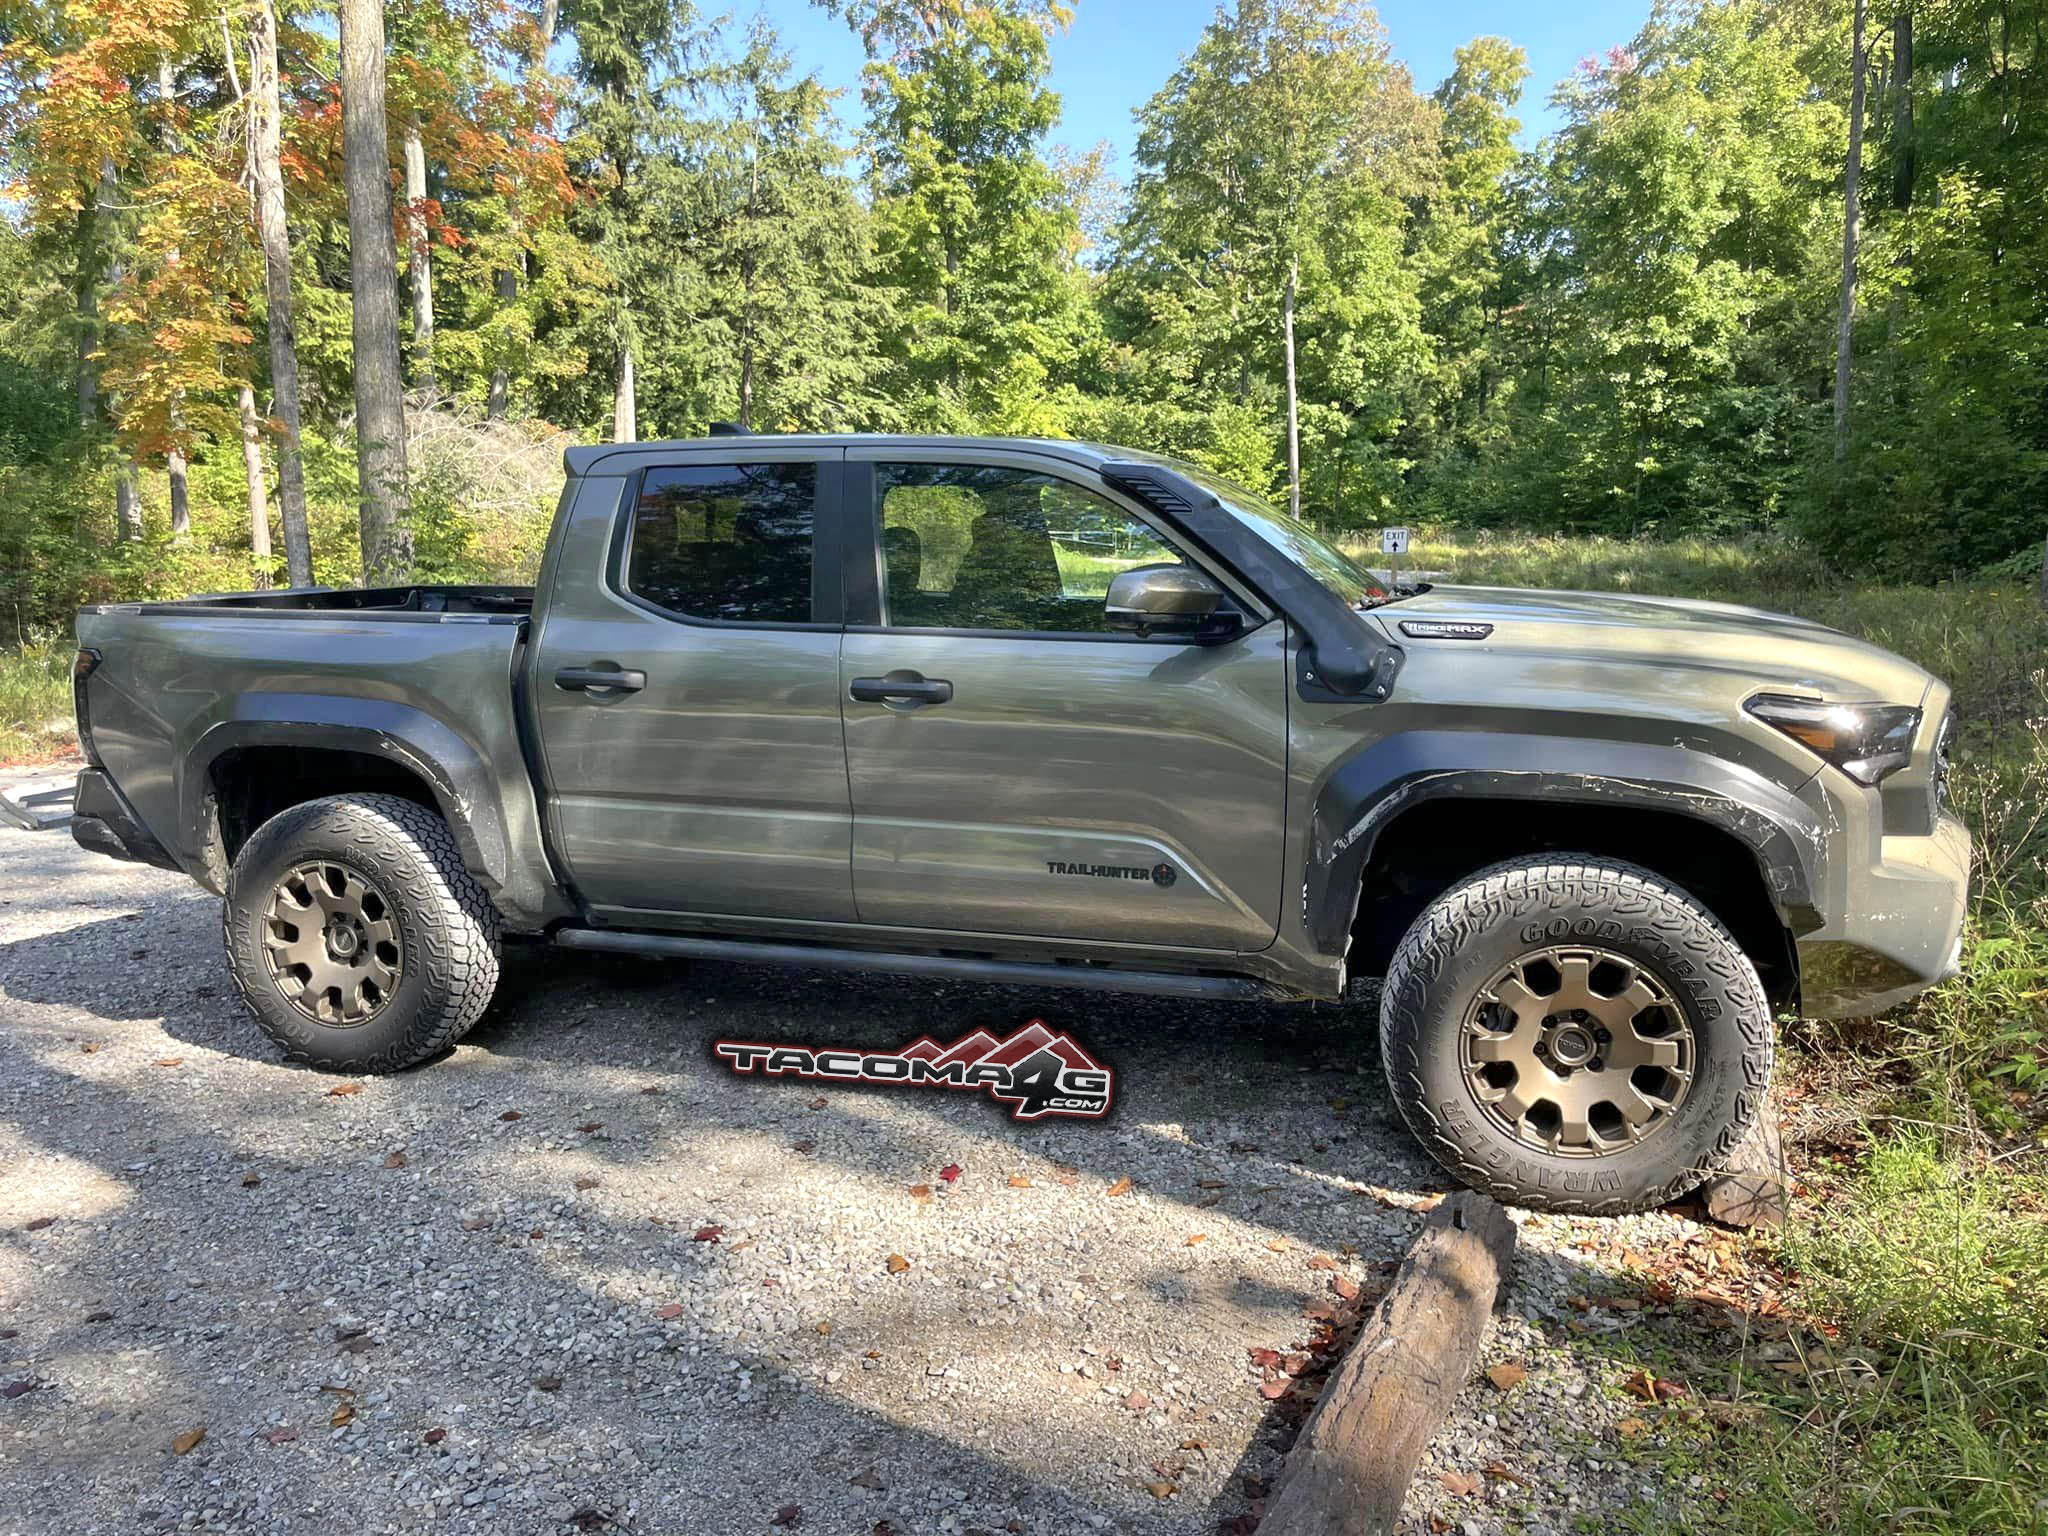 2024 Tacoma Official BRONZE OXIDE 2024 Tacoma Thread (4th Gen) 5 foot Short Bed 2024 Toyota Tacoma Trail hunter Bronze Oxide 1